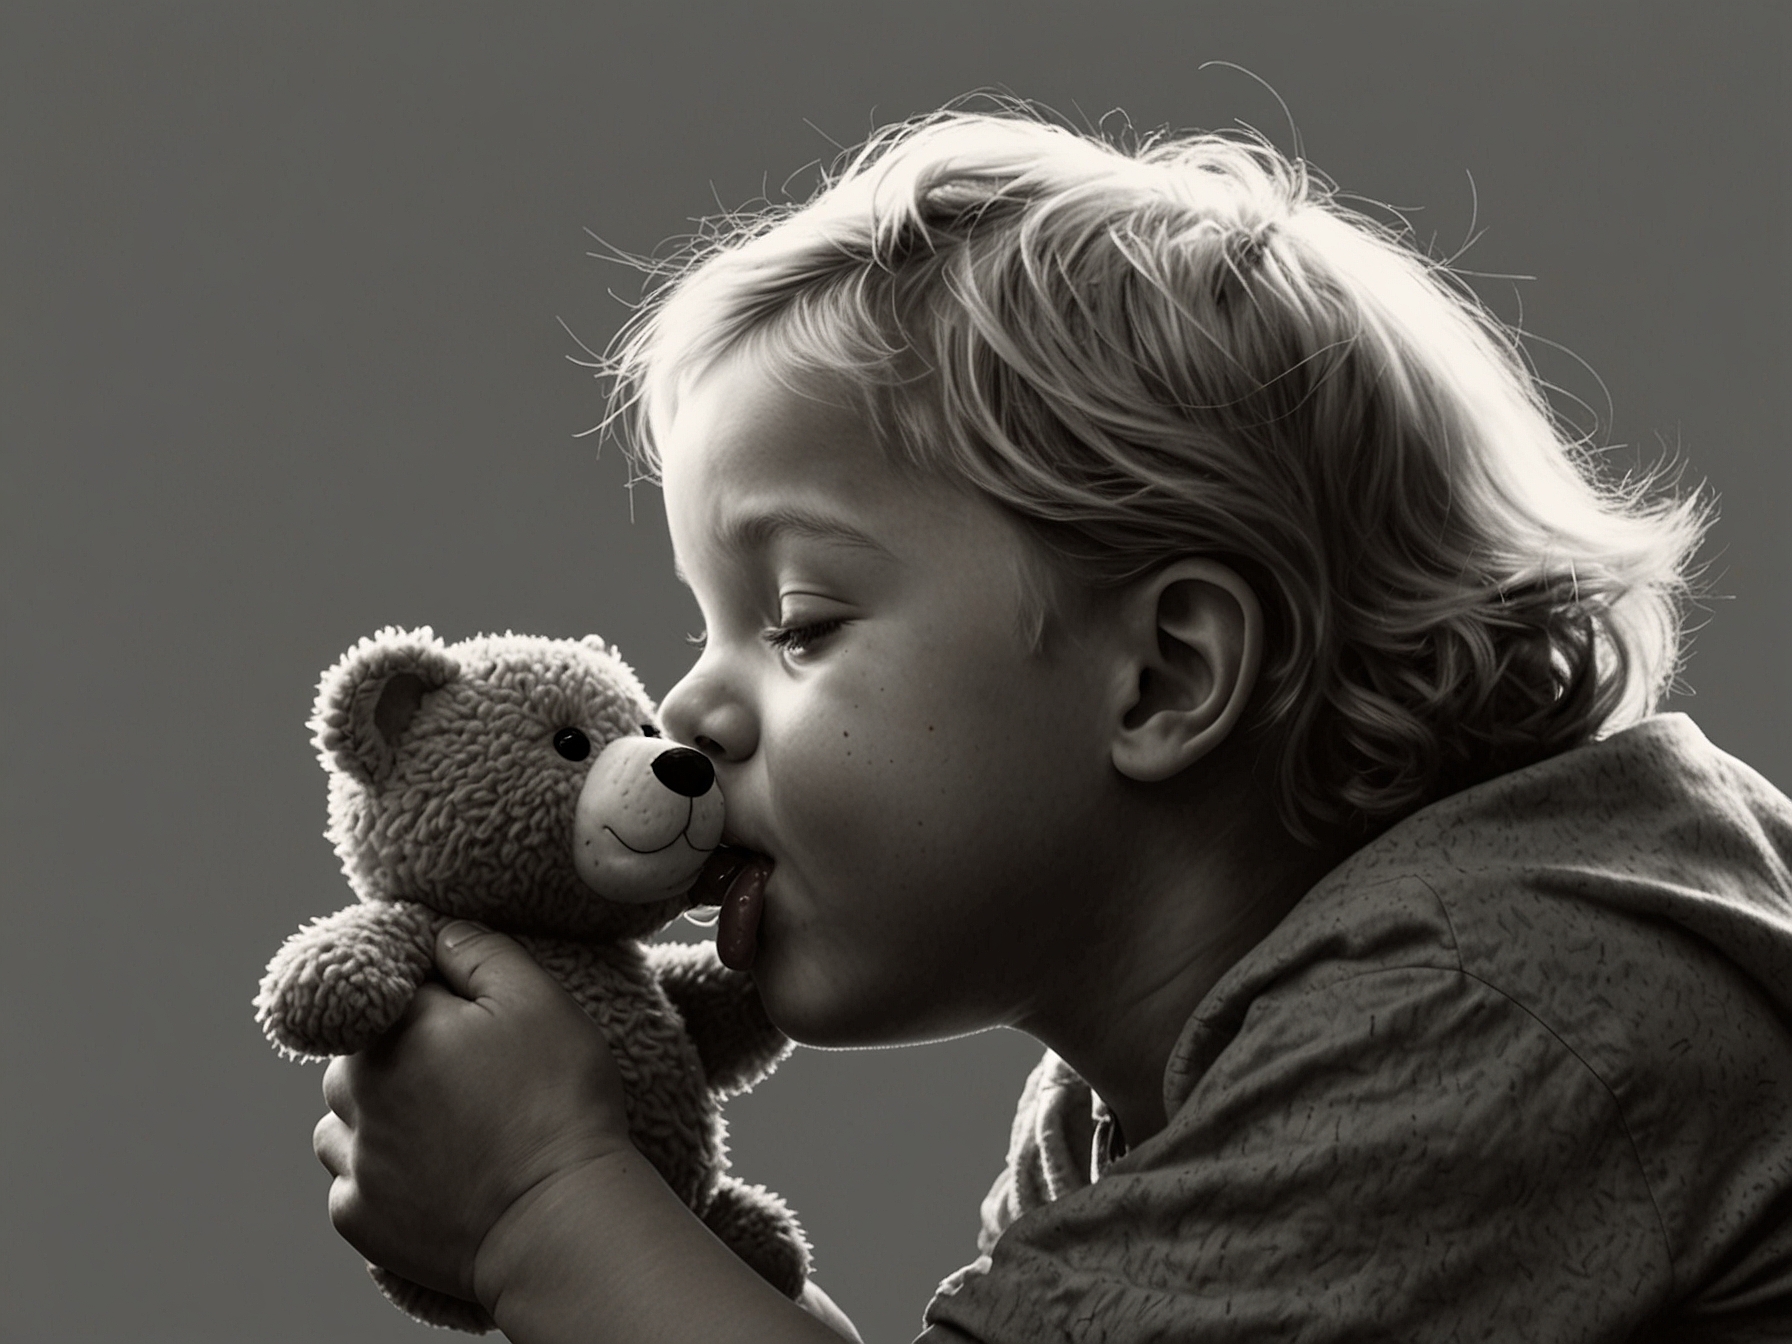 A young child holding a stuffed animal and sucking on a pacifier, part of a consistent bedtime routine to promote better sleep.